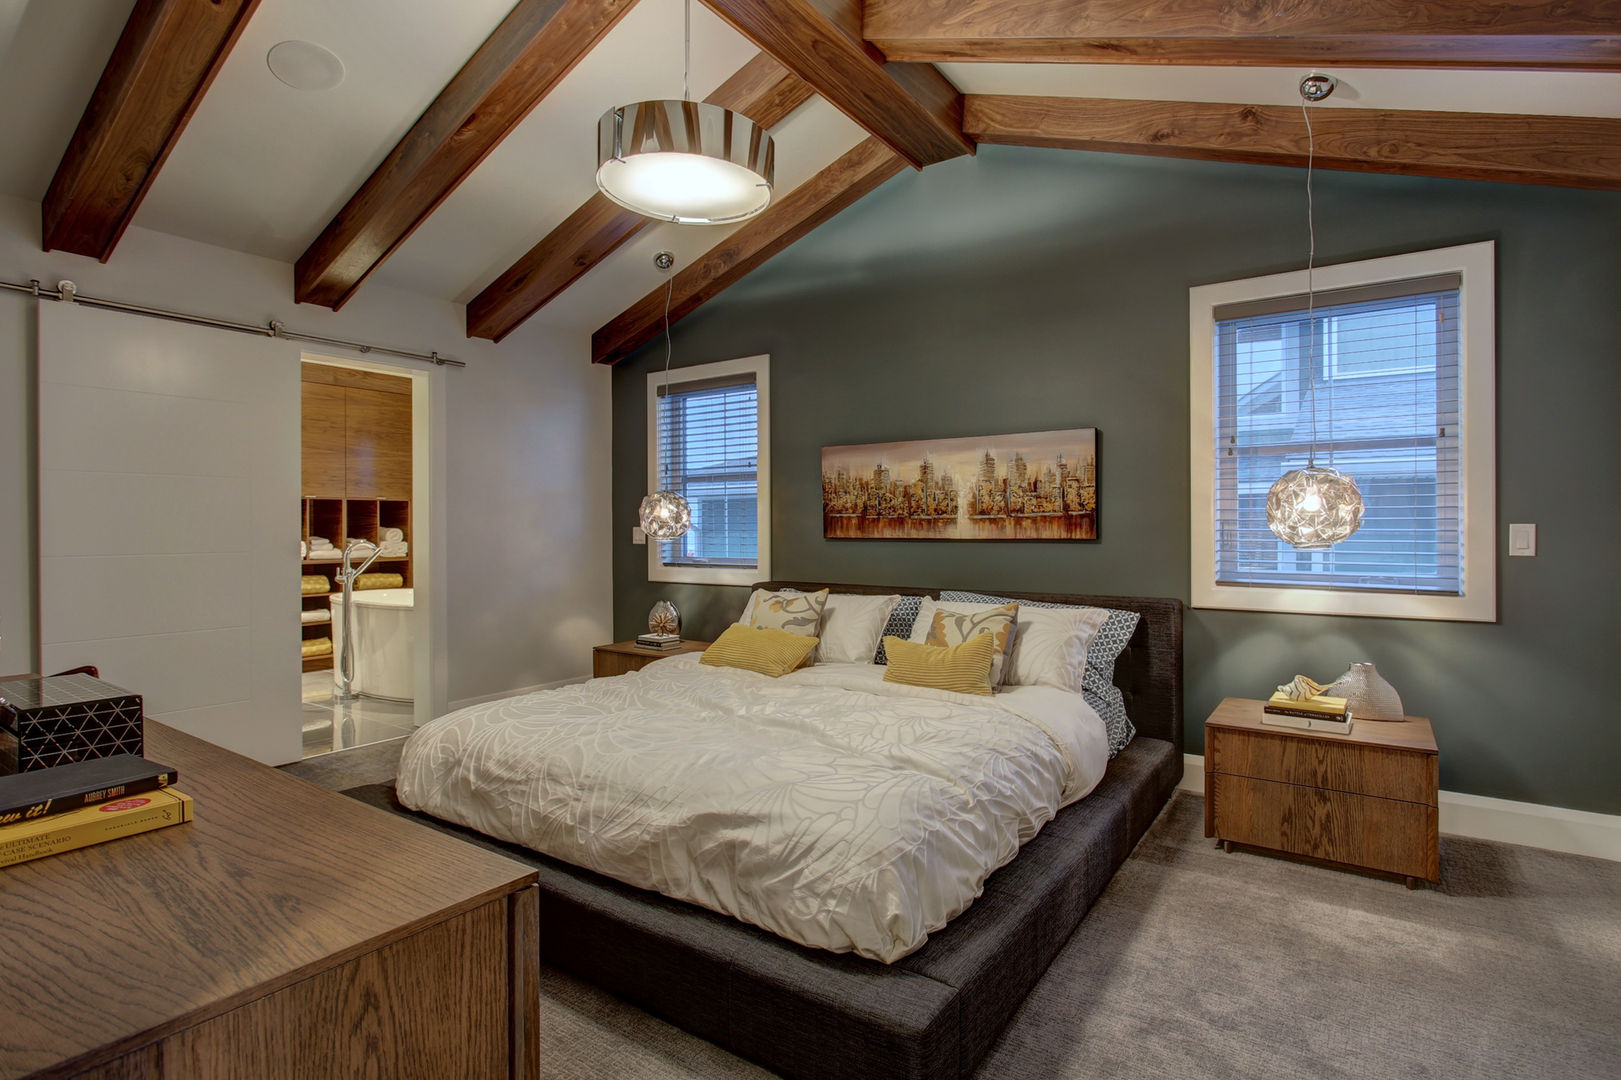 61 Paintbrush Park, Sonata Design Sonata Design Eclectic style bedroom Furniture,Picture frame,Property,Building,Window,Comfort,Table,Wood,Cabinetry,Bed frame